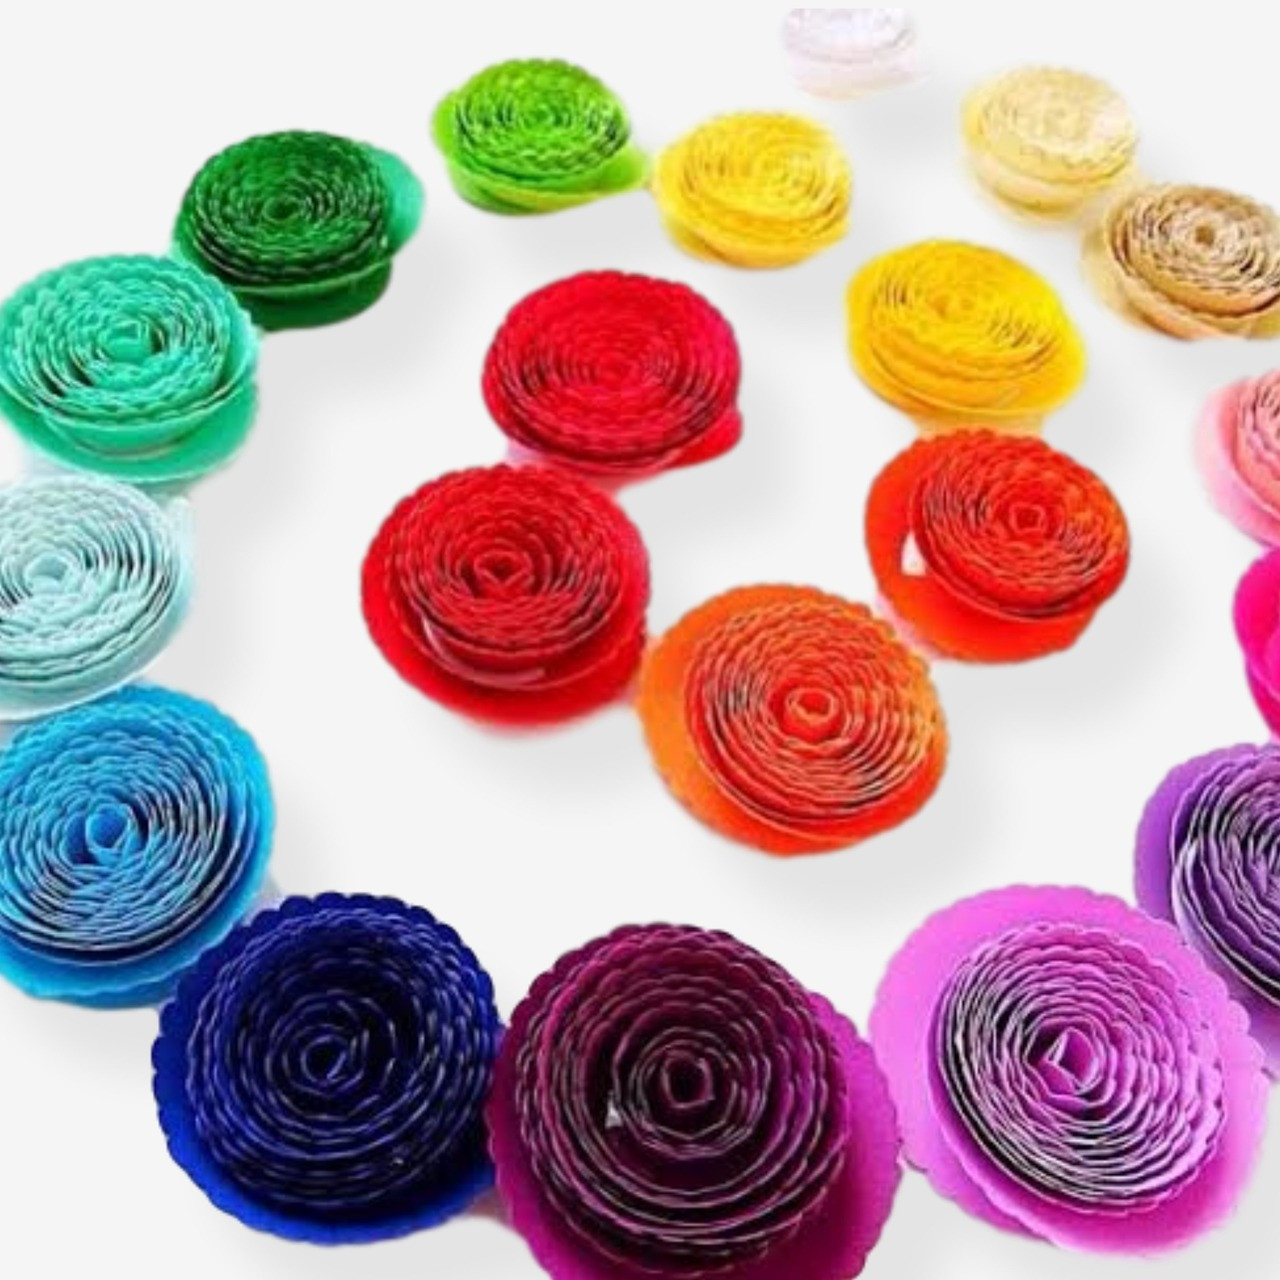 Set Of 10 Rolled Rosette Paper Flower Templates Catching Colorflies 9033